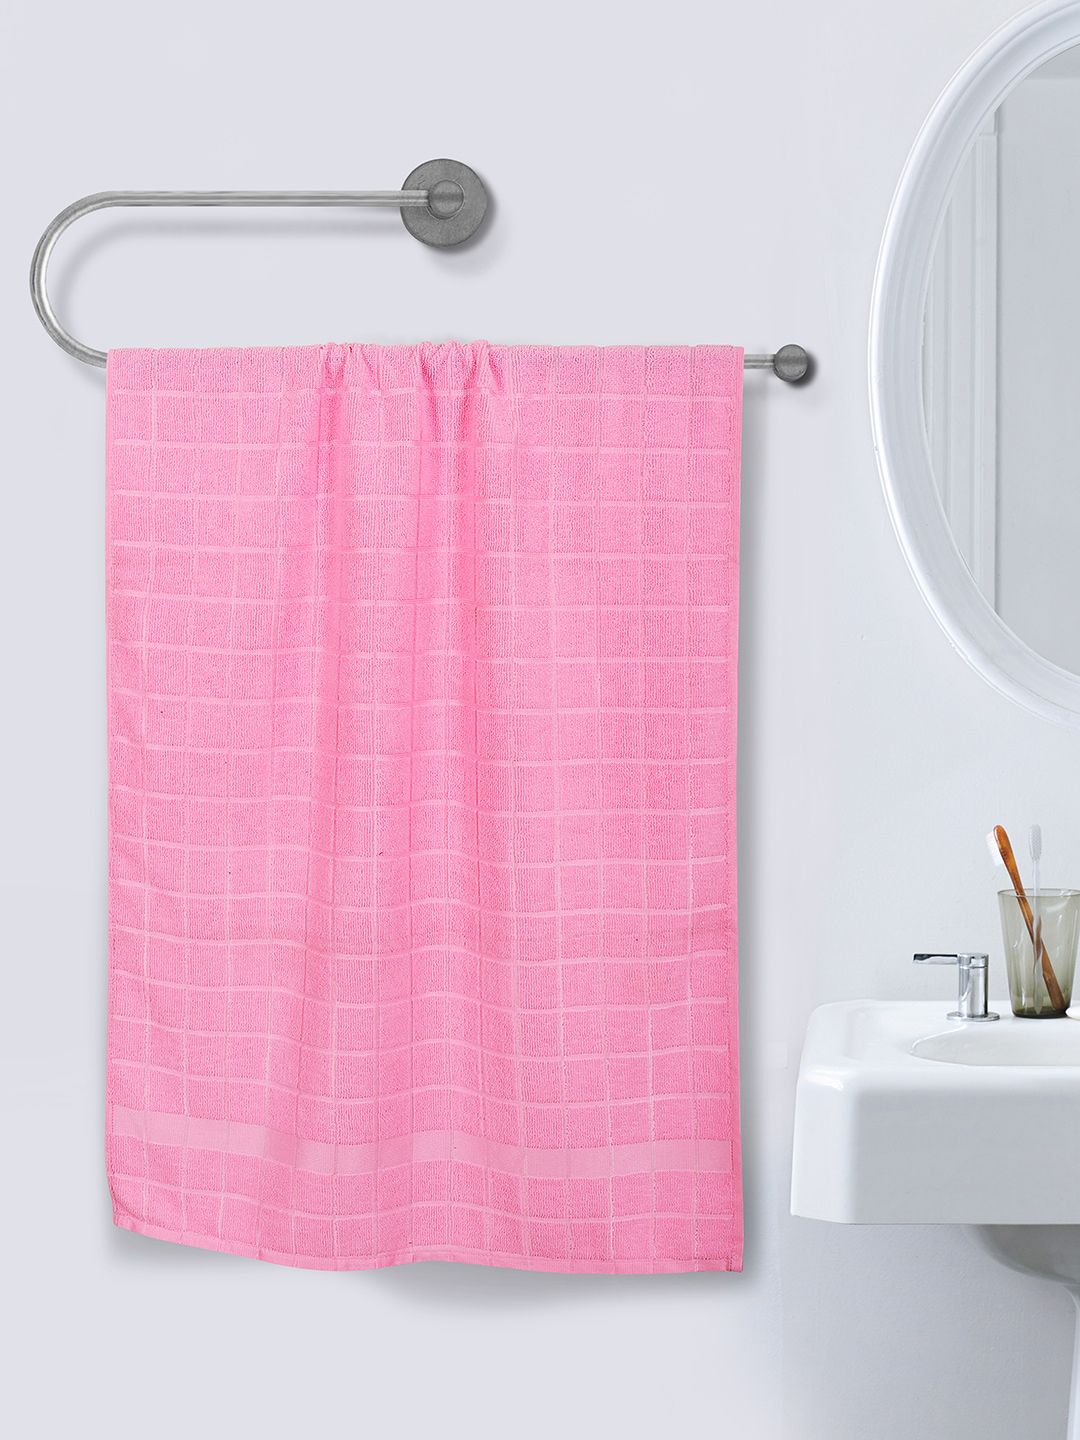 ROMEE Set of 2 Pink Striped Cotton 500 GSM Bath Towels Price in India